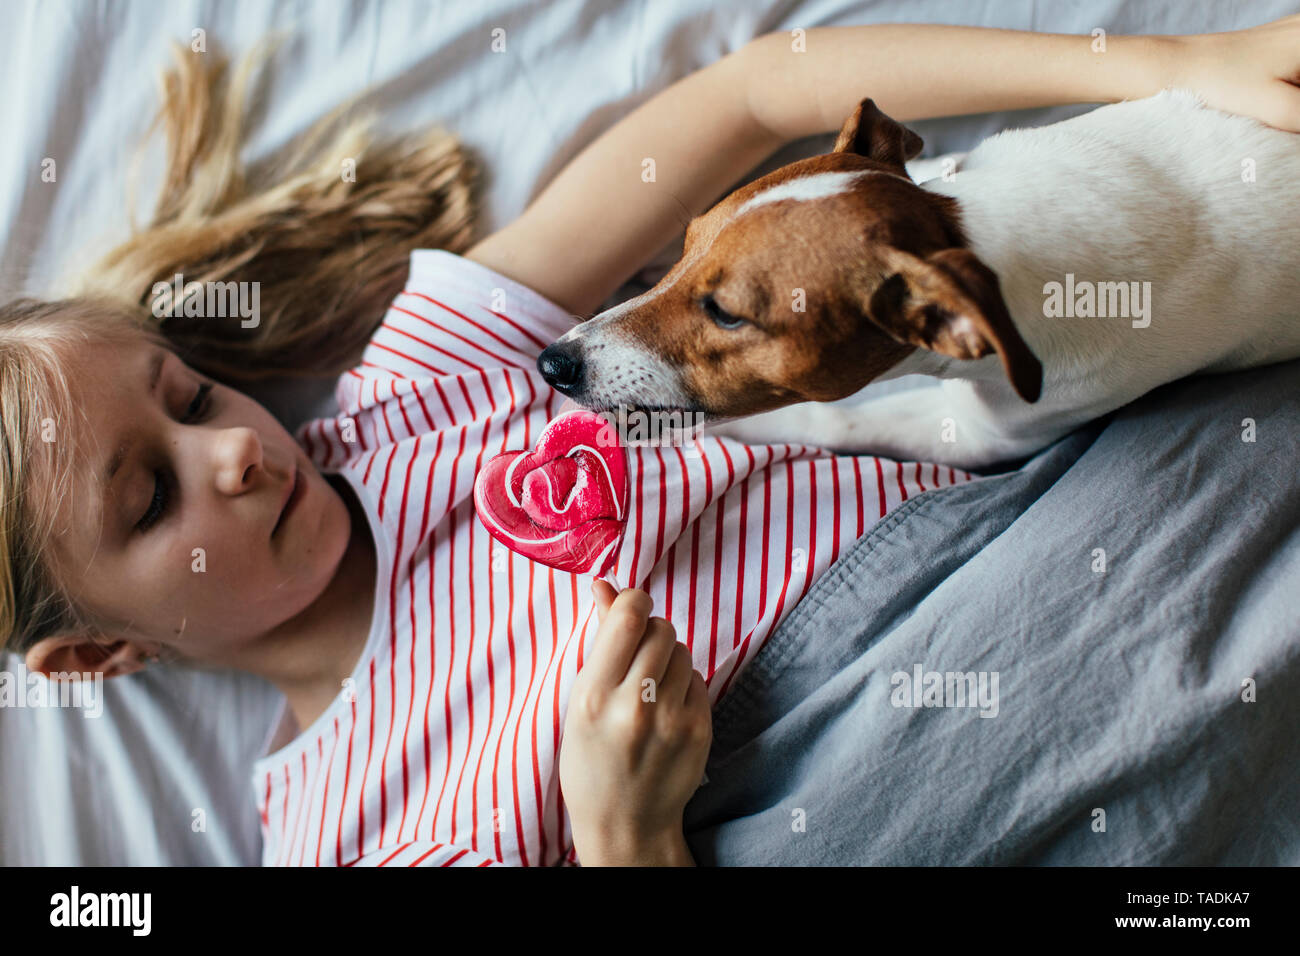 Girl lying on bed watching her dog licking lollipop Stock Photo